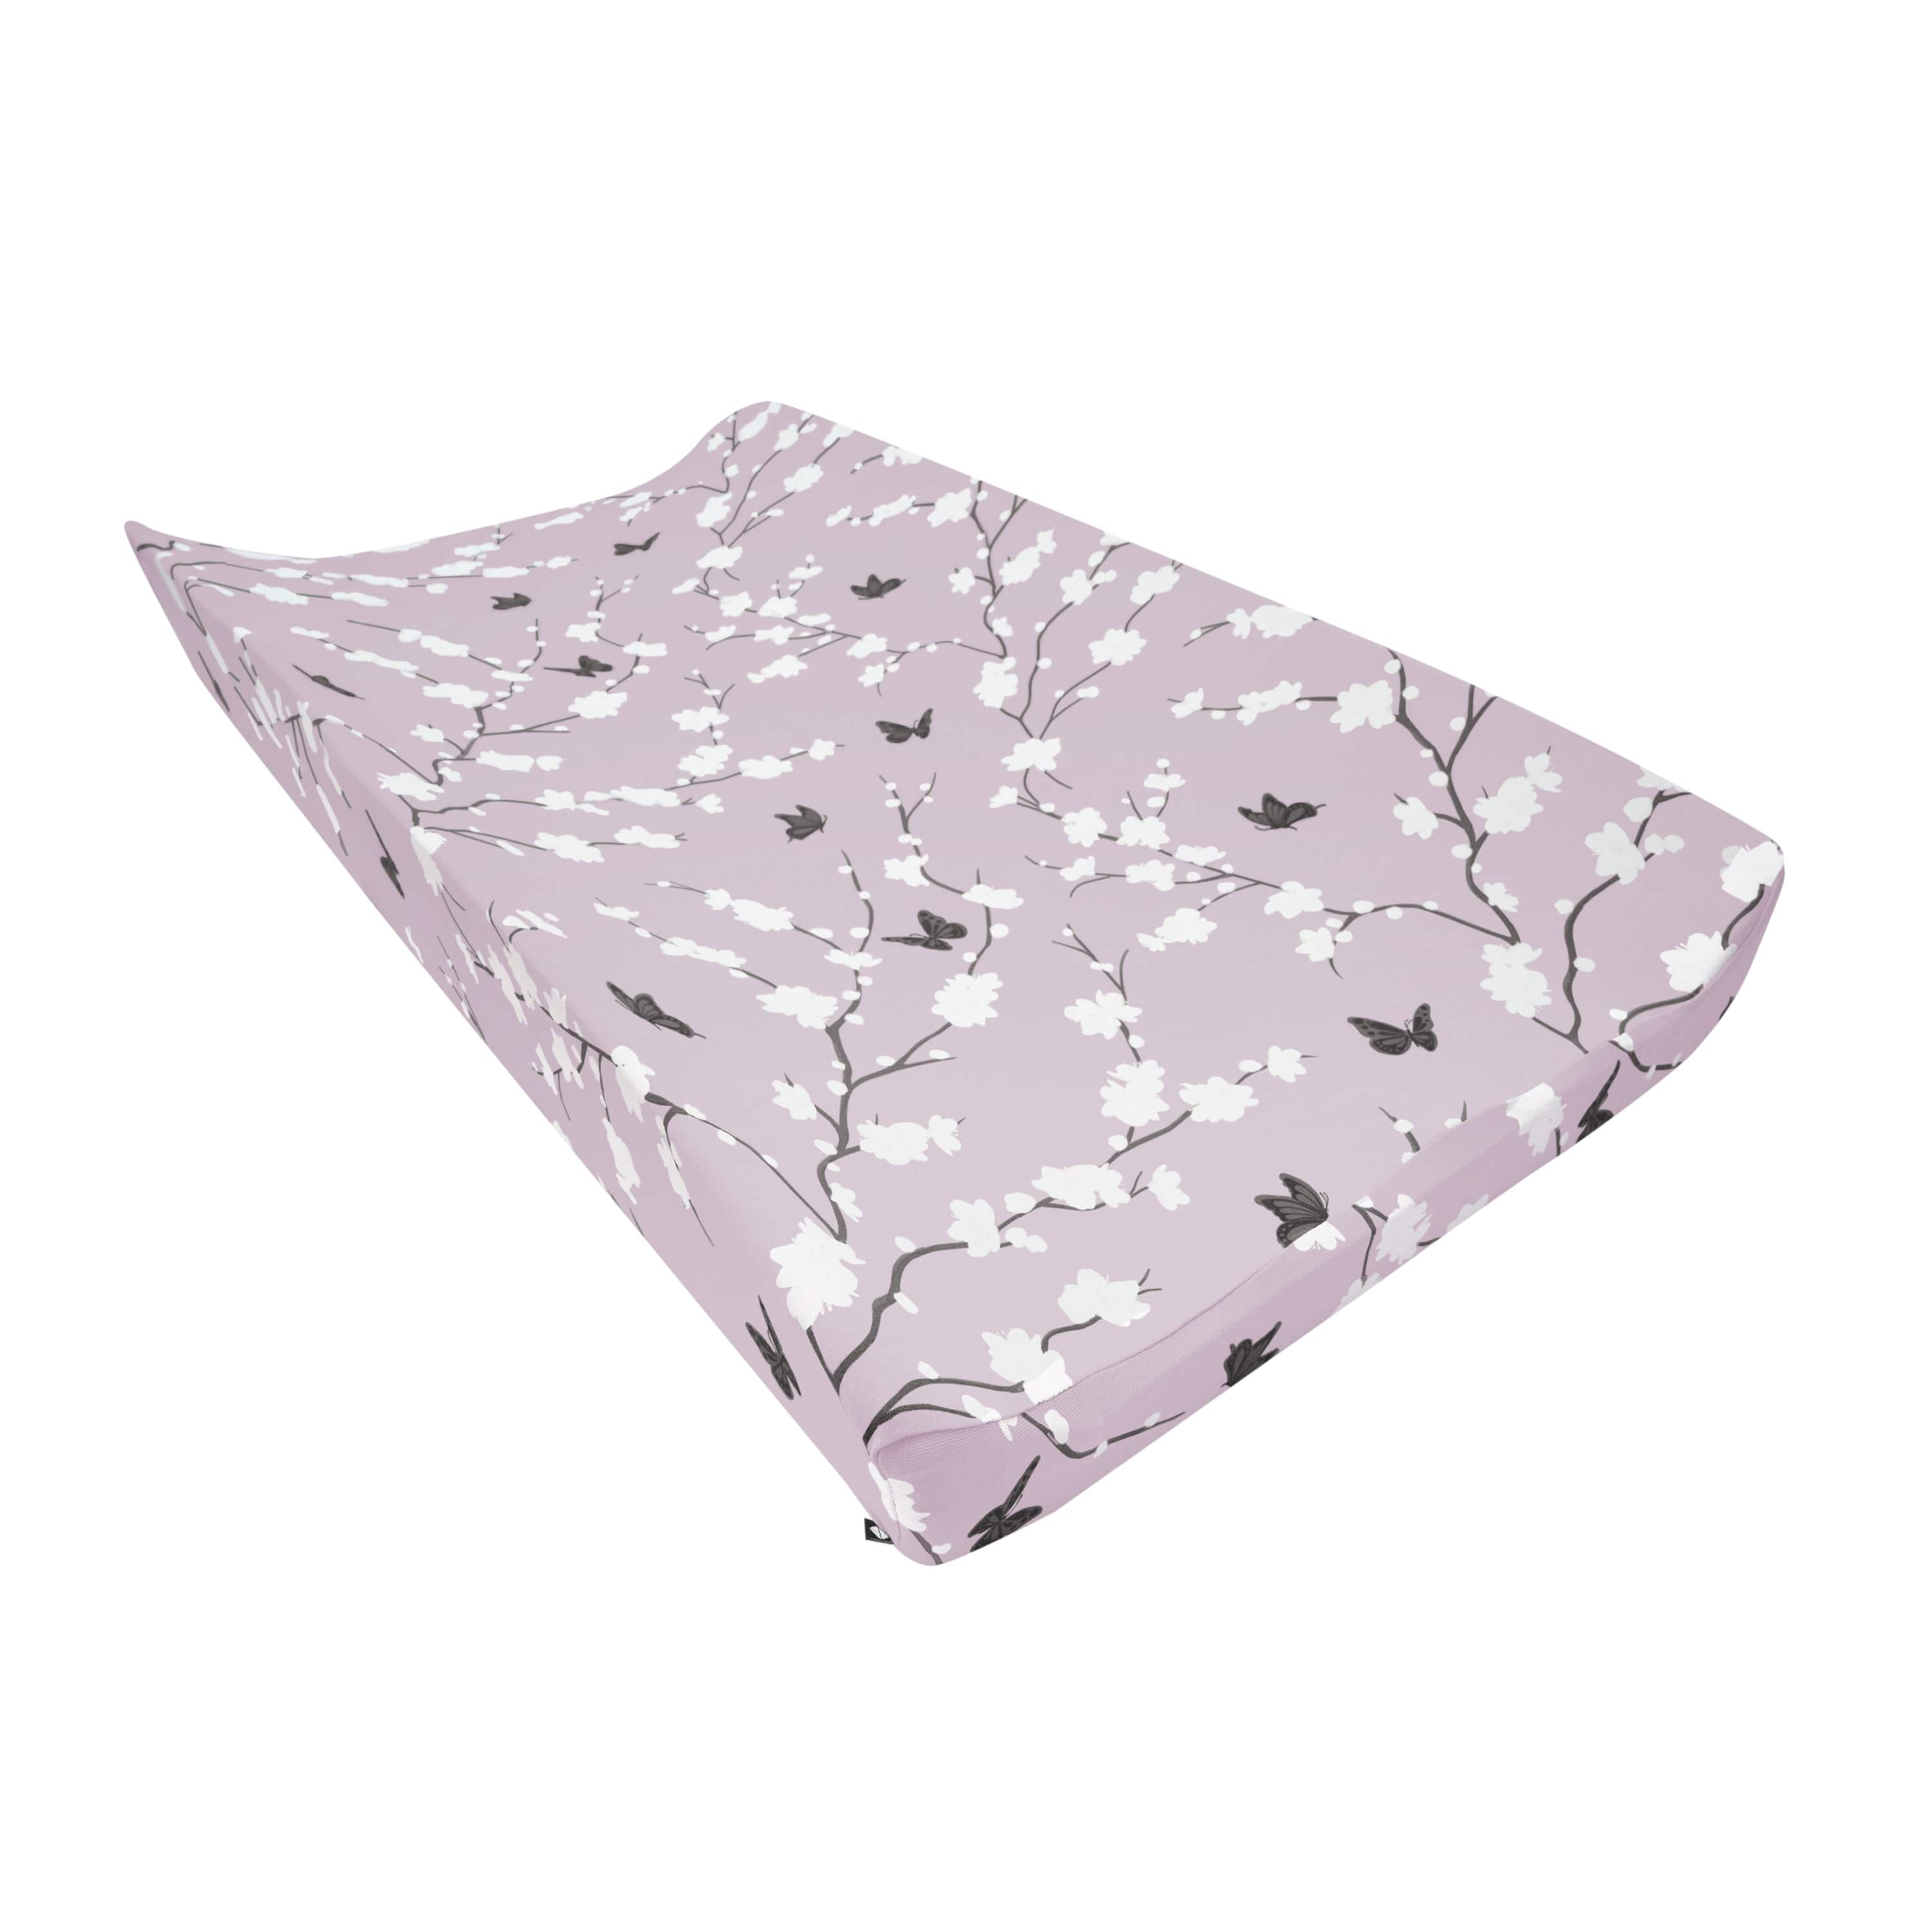 Kyte Baby Change Pad Cover Cherry Blossom / One Size Change Pad Cover in Cherry Blossom